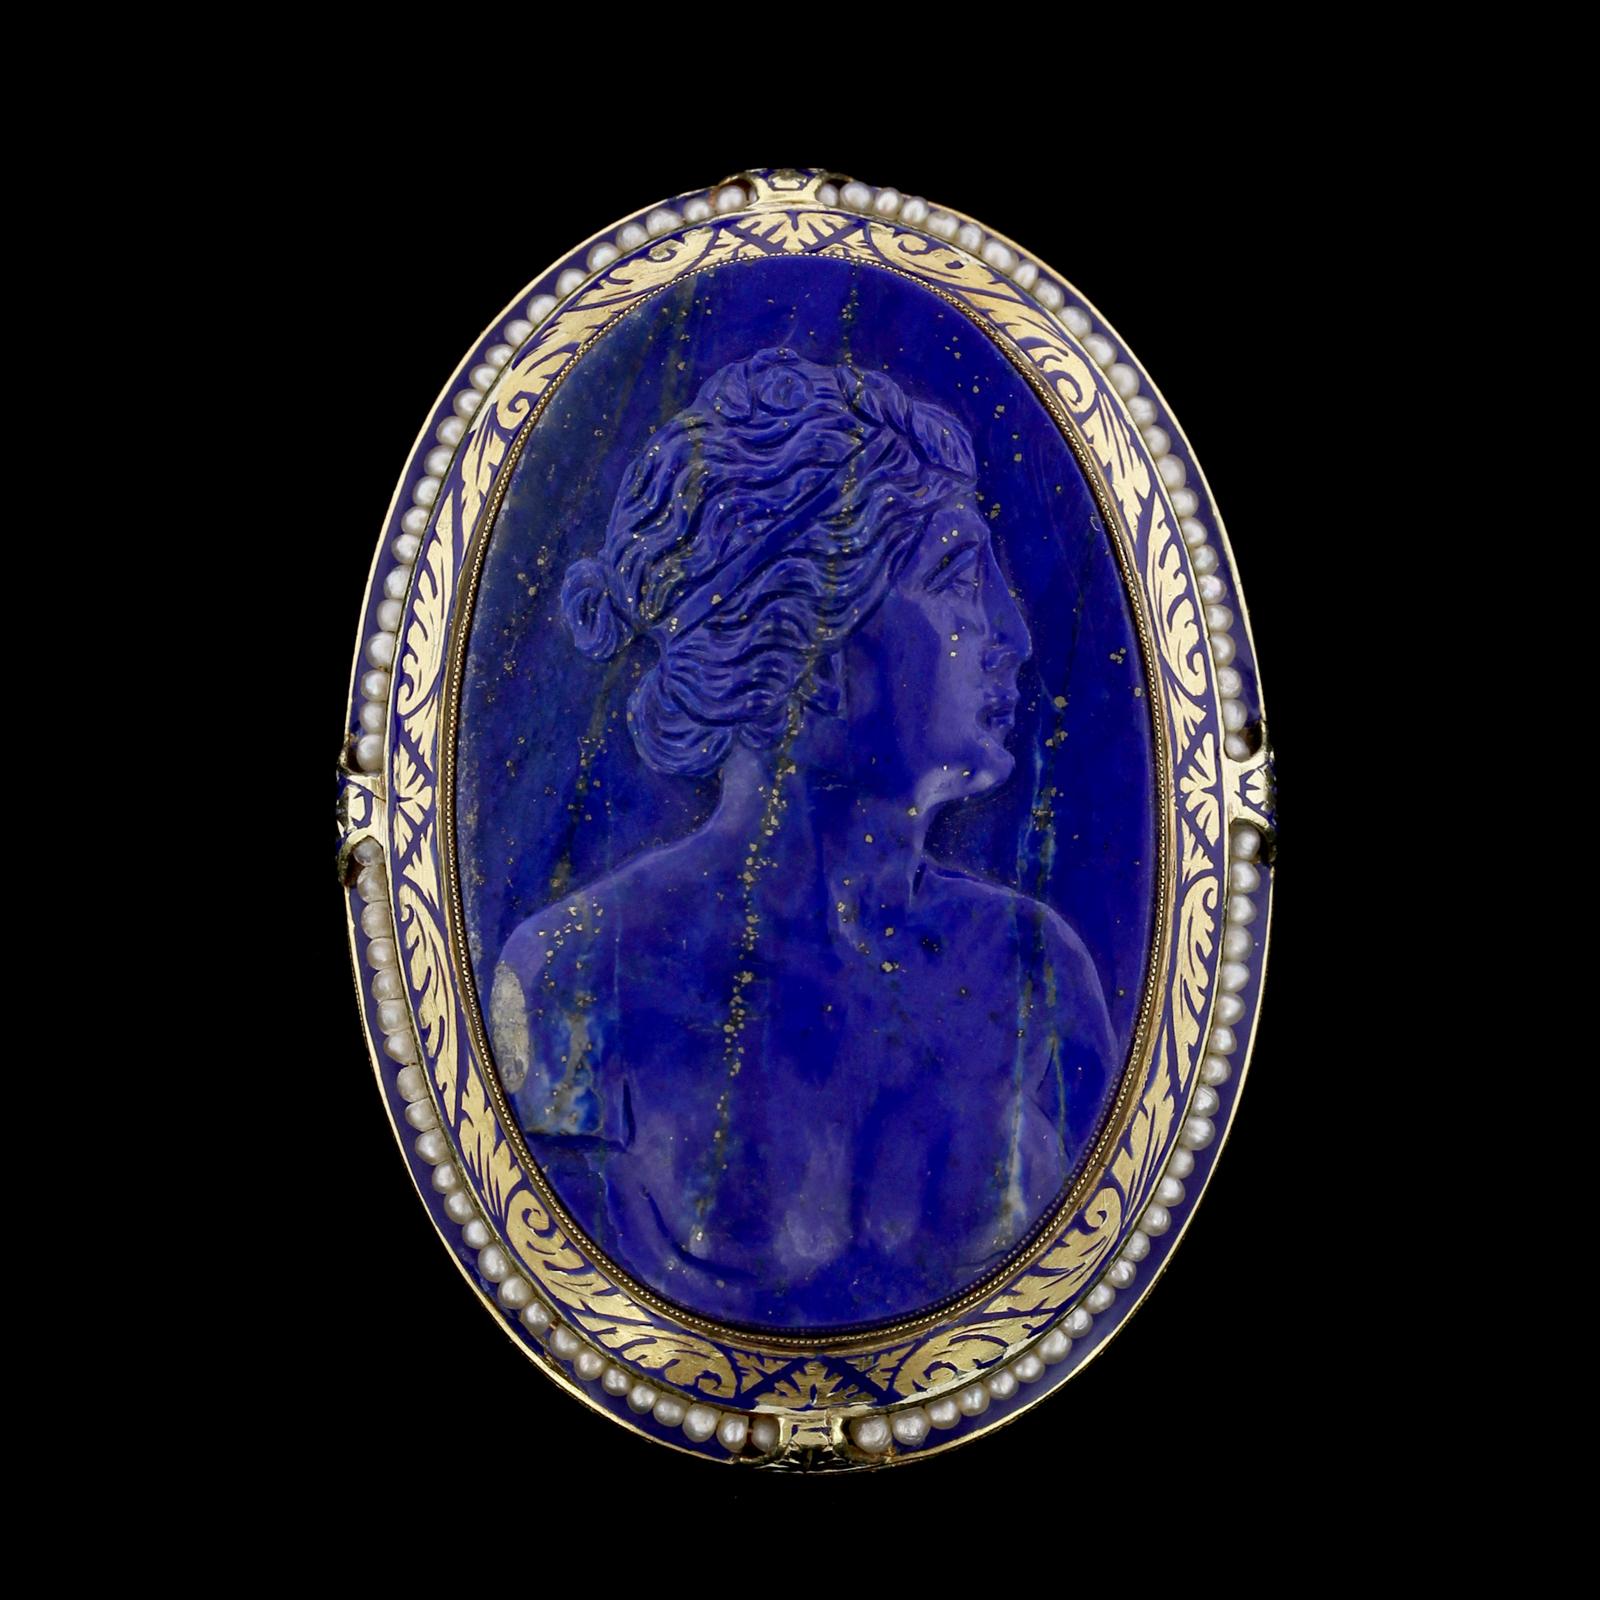 Antique 14K Yellow Gold Carved Lapis Cameo Brooch Pendant. The pin is set with a carved lapis
cameo measuring 45.00 x 28.00mm., framed by seed pearls and blue enamel accents,
length 2 1/8